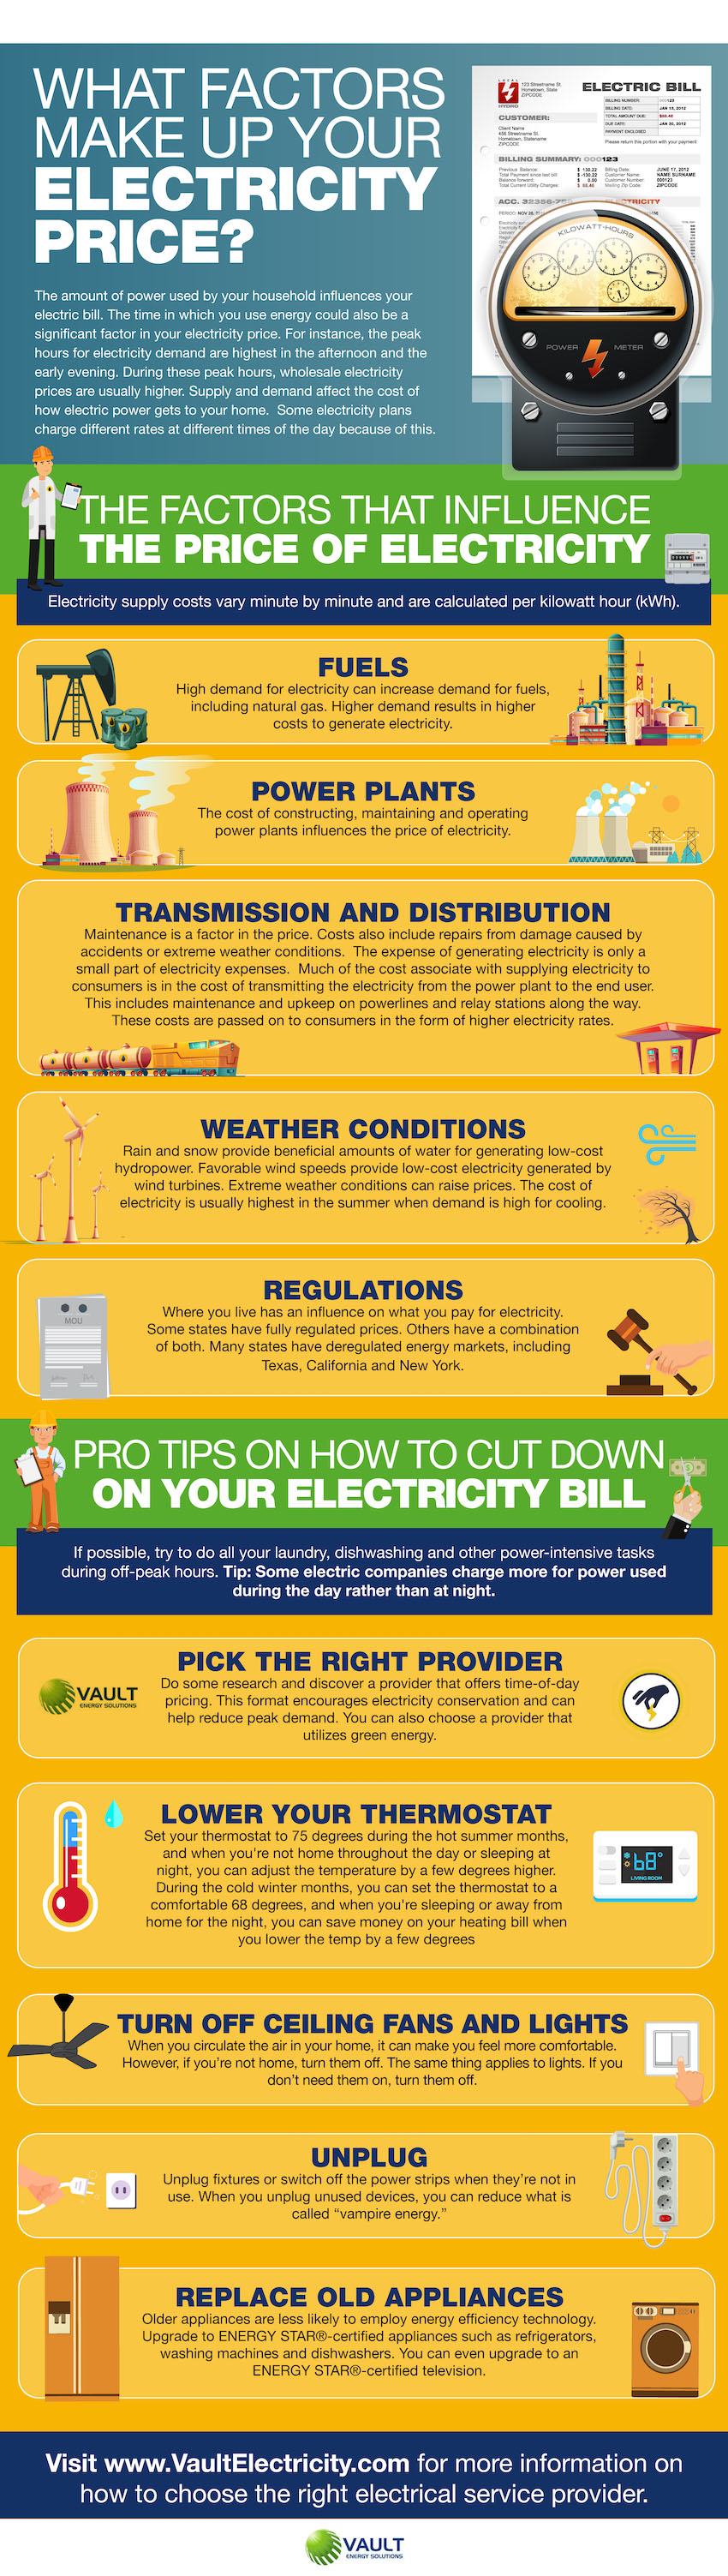 How do the electric companies determine the price of electricity?